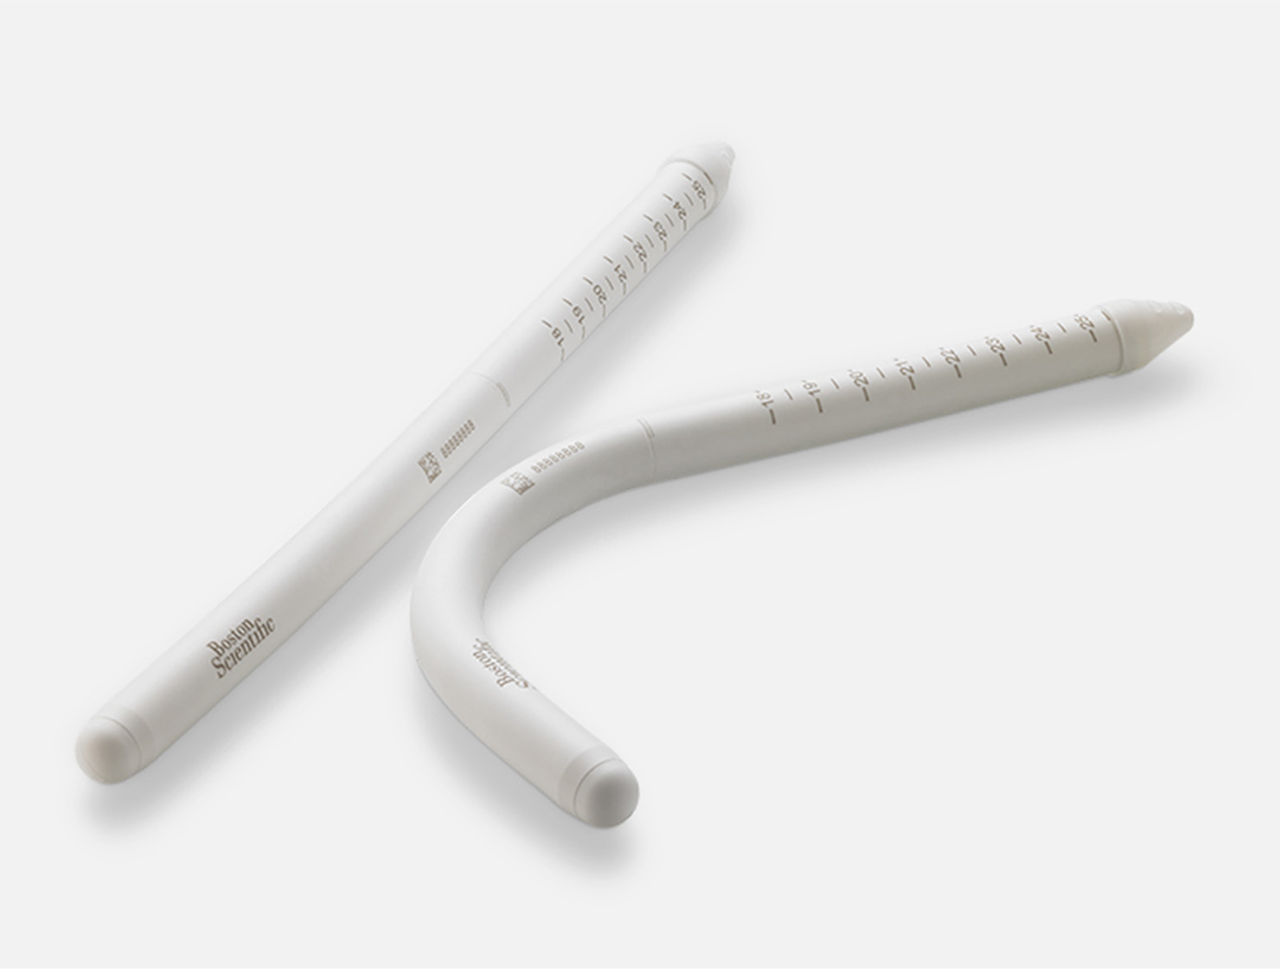 Tactra™ Malleable Penile Implant product shot.